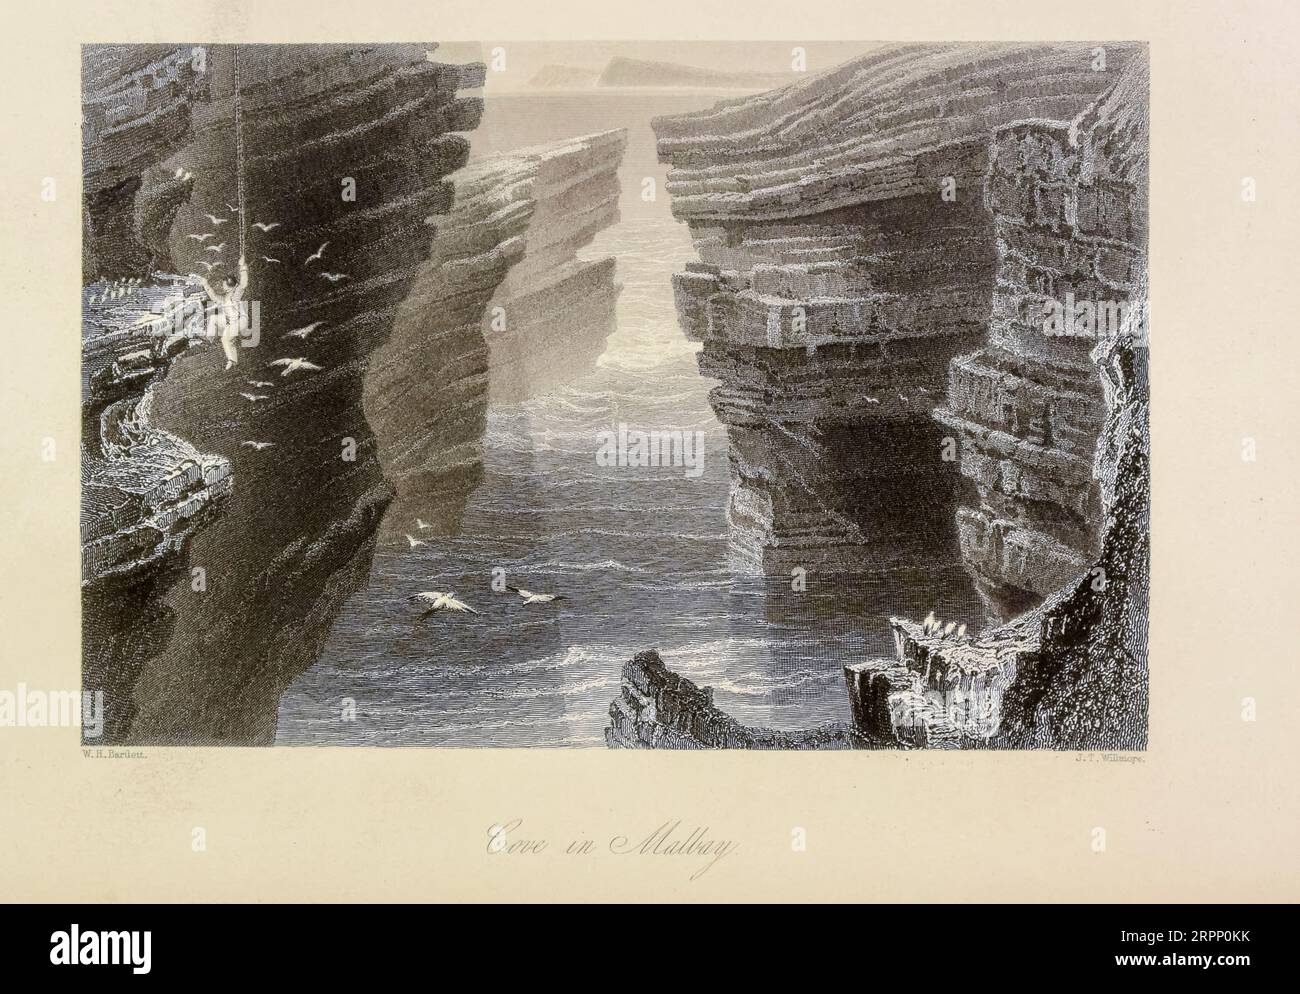 Cove in Malbay Steel engraving from The scenery and antiquities of Ireland by Bartlett, W. H. (William Henry), 1809-1854, illustrator.Volume 2. Publisher London : George Virtue 1842 William Henry Bartlett (March 26, 1809 – September 13, 1854) was a British artist, best known for his numerous drawings rendered into steel engravings. Stock Photo